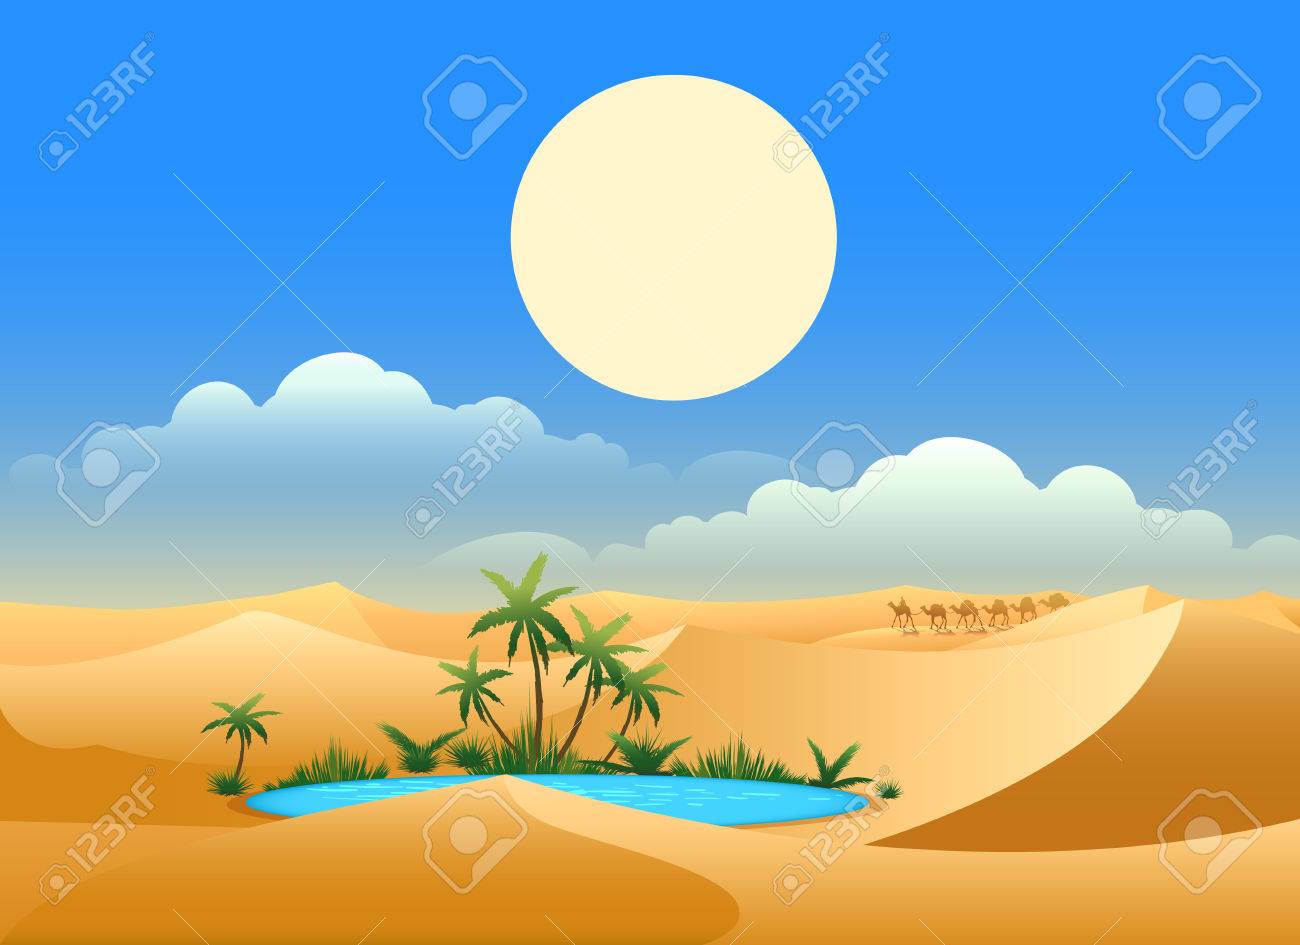 Desert Oasis Background Egypt Hot Dunes With Palm Trees Bedouin